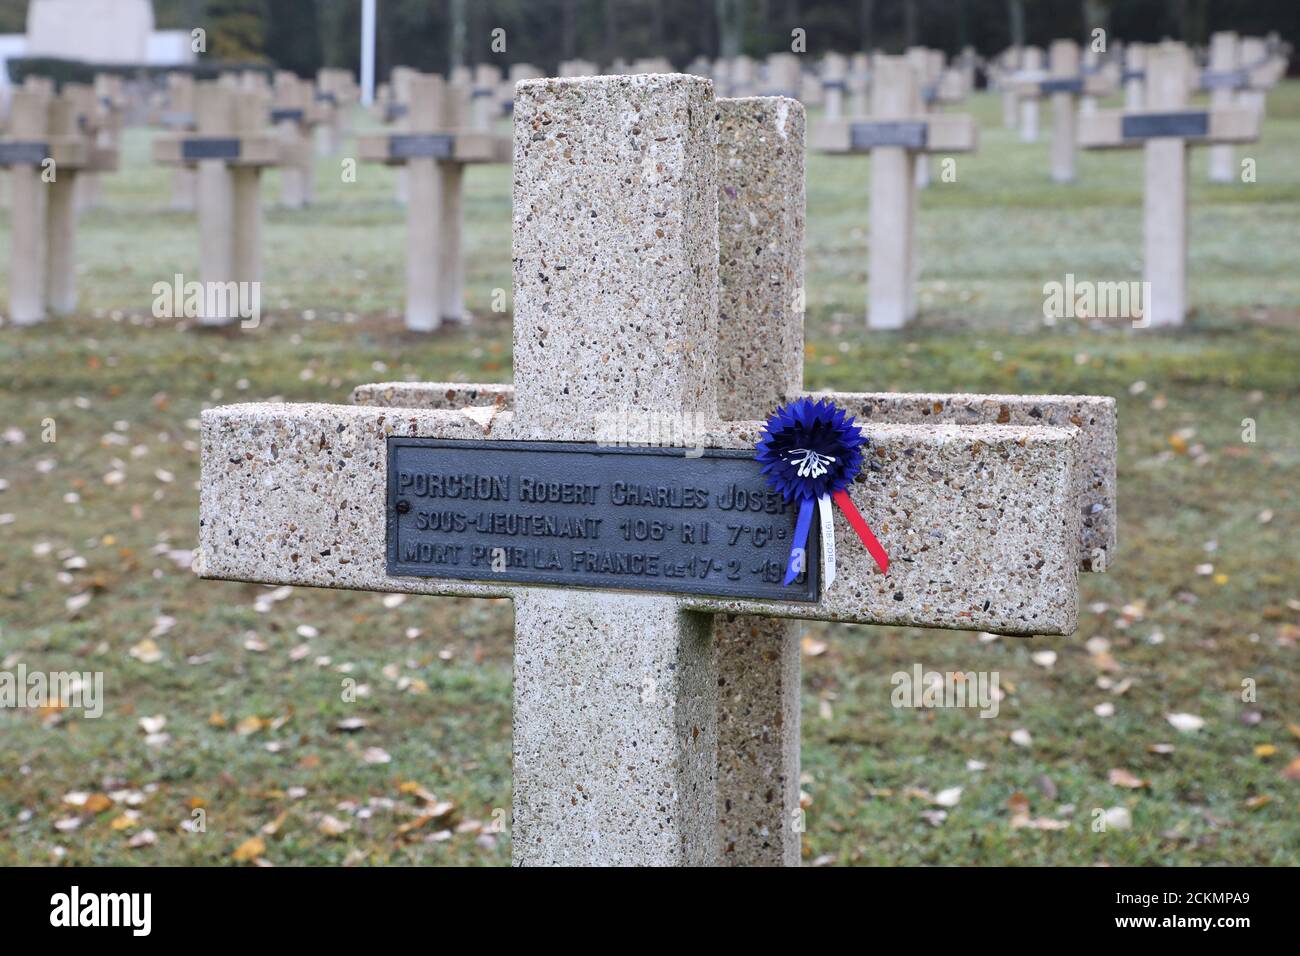 The tomb of Lieutenant Robert Porchon, brother-in-arms of French writer Maurice Genevoix, is pictured at the Trottoir necropolis in Les Eparges, France, November 6, 2018, as part of the ceremonies marking the centenary of the First World War. Ludovic Marin/Pool via REUTERS Stock Photo